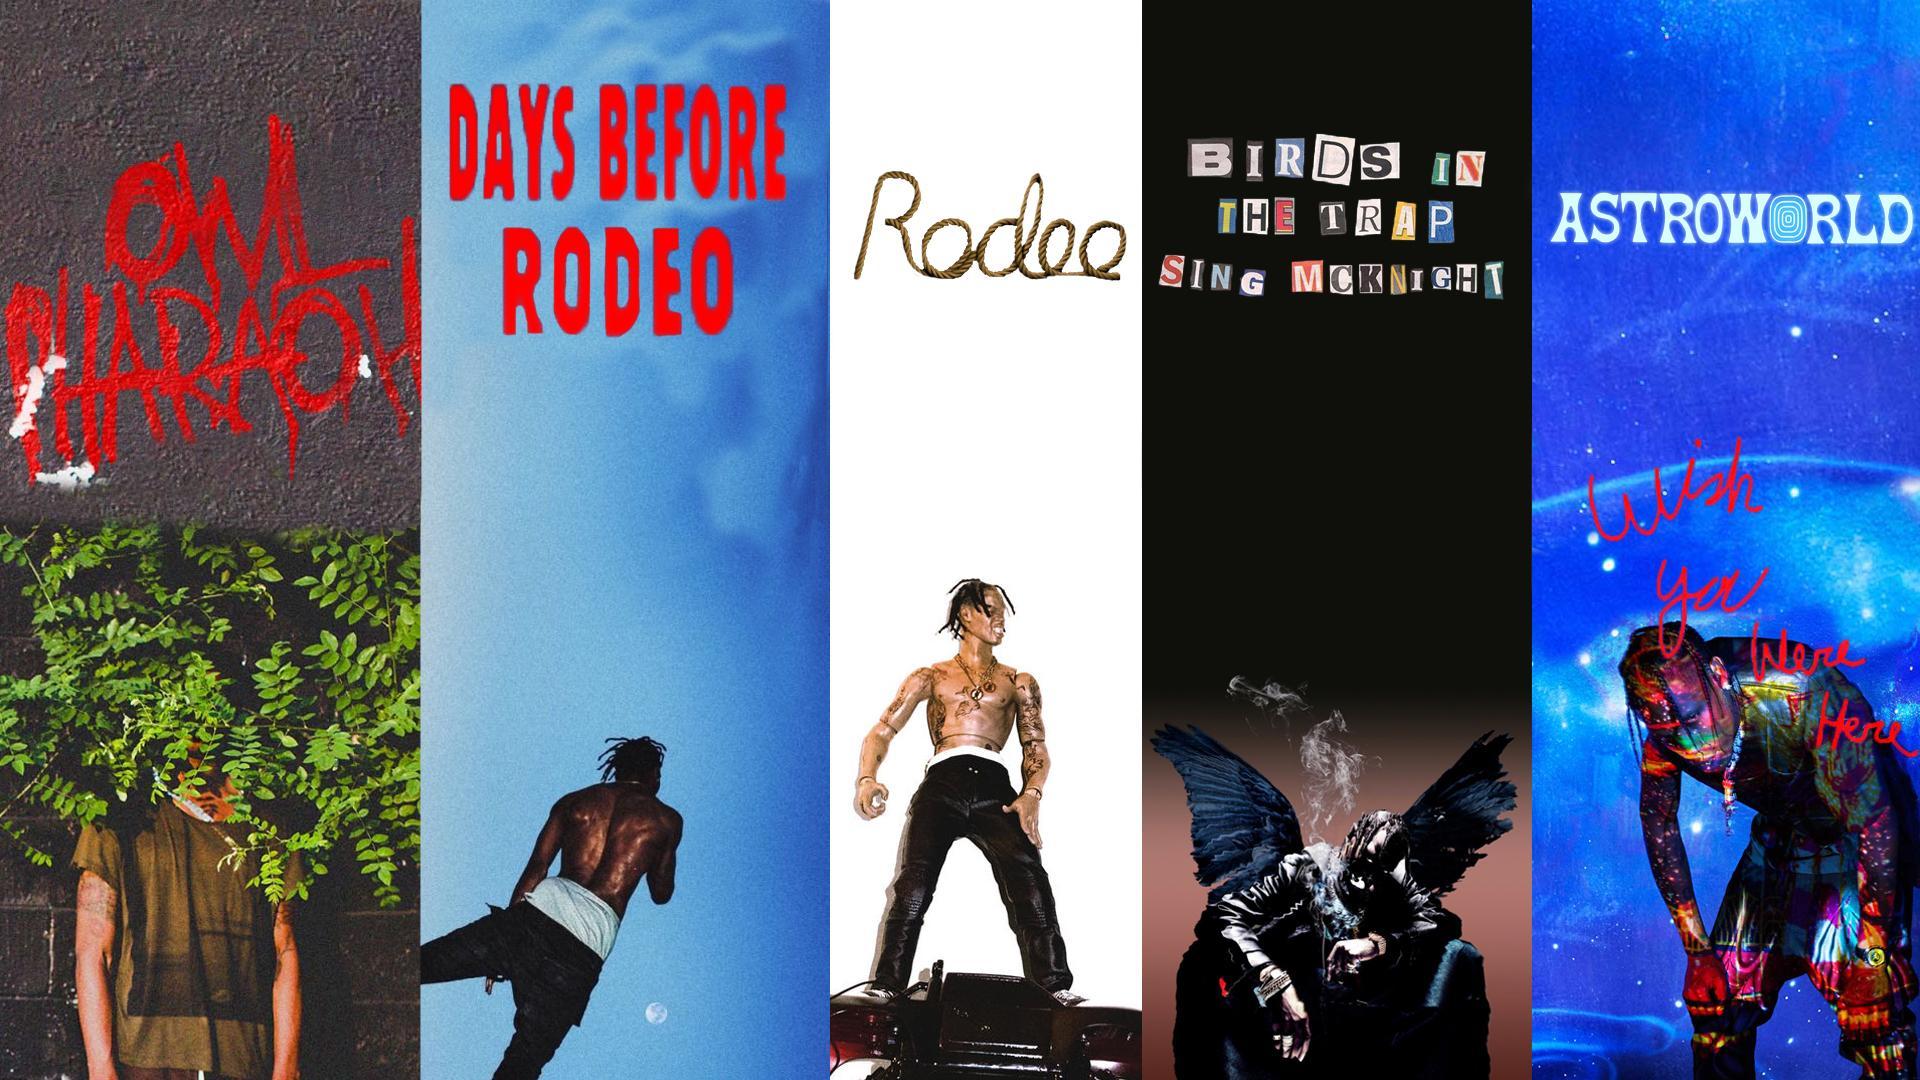 Made a Travis Scott wallpaper of all his albums. LMK how I did!